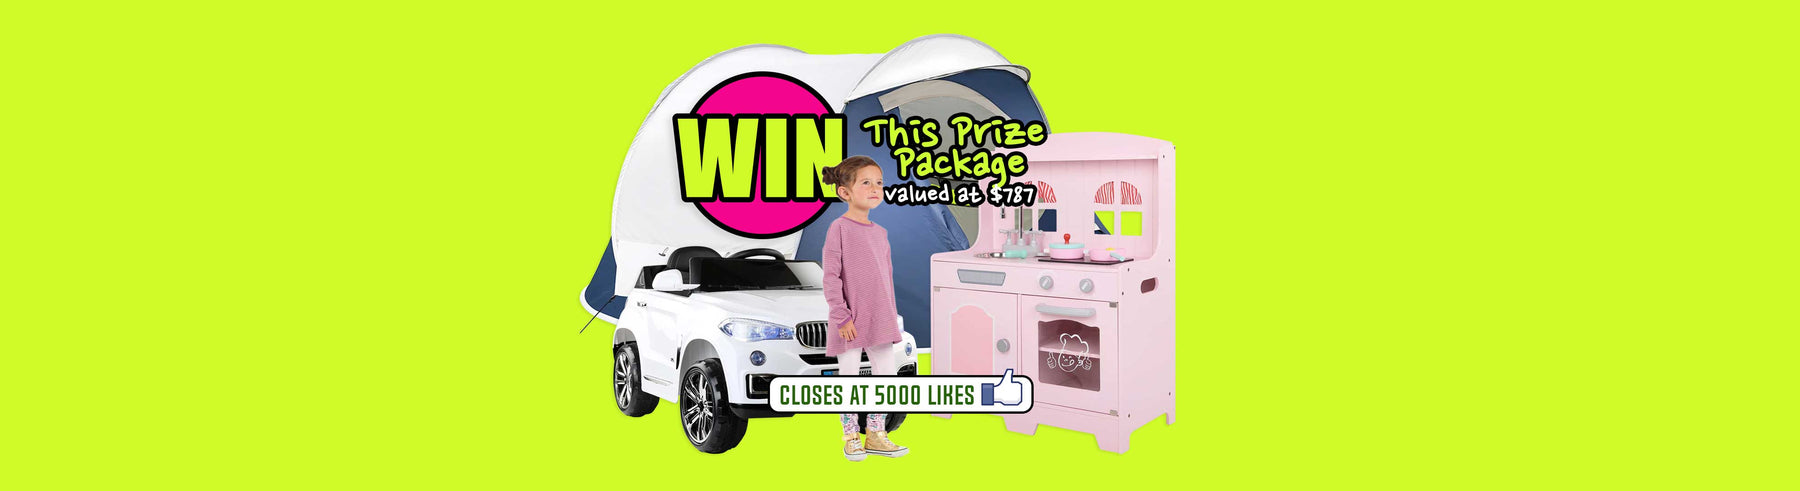 WIN this AWESOME Prize Pack, valued at $787...